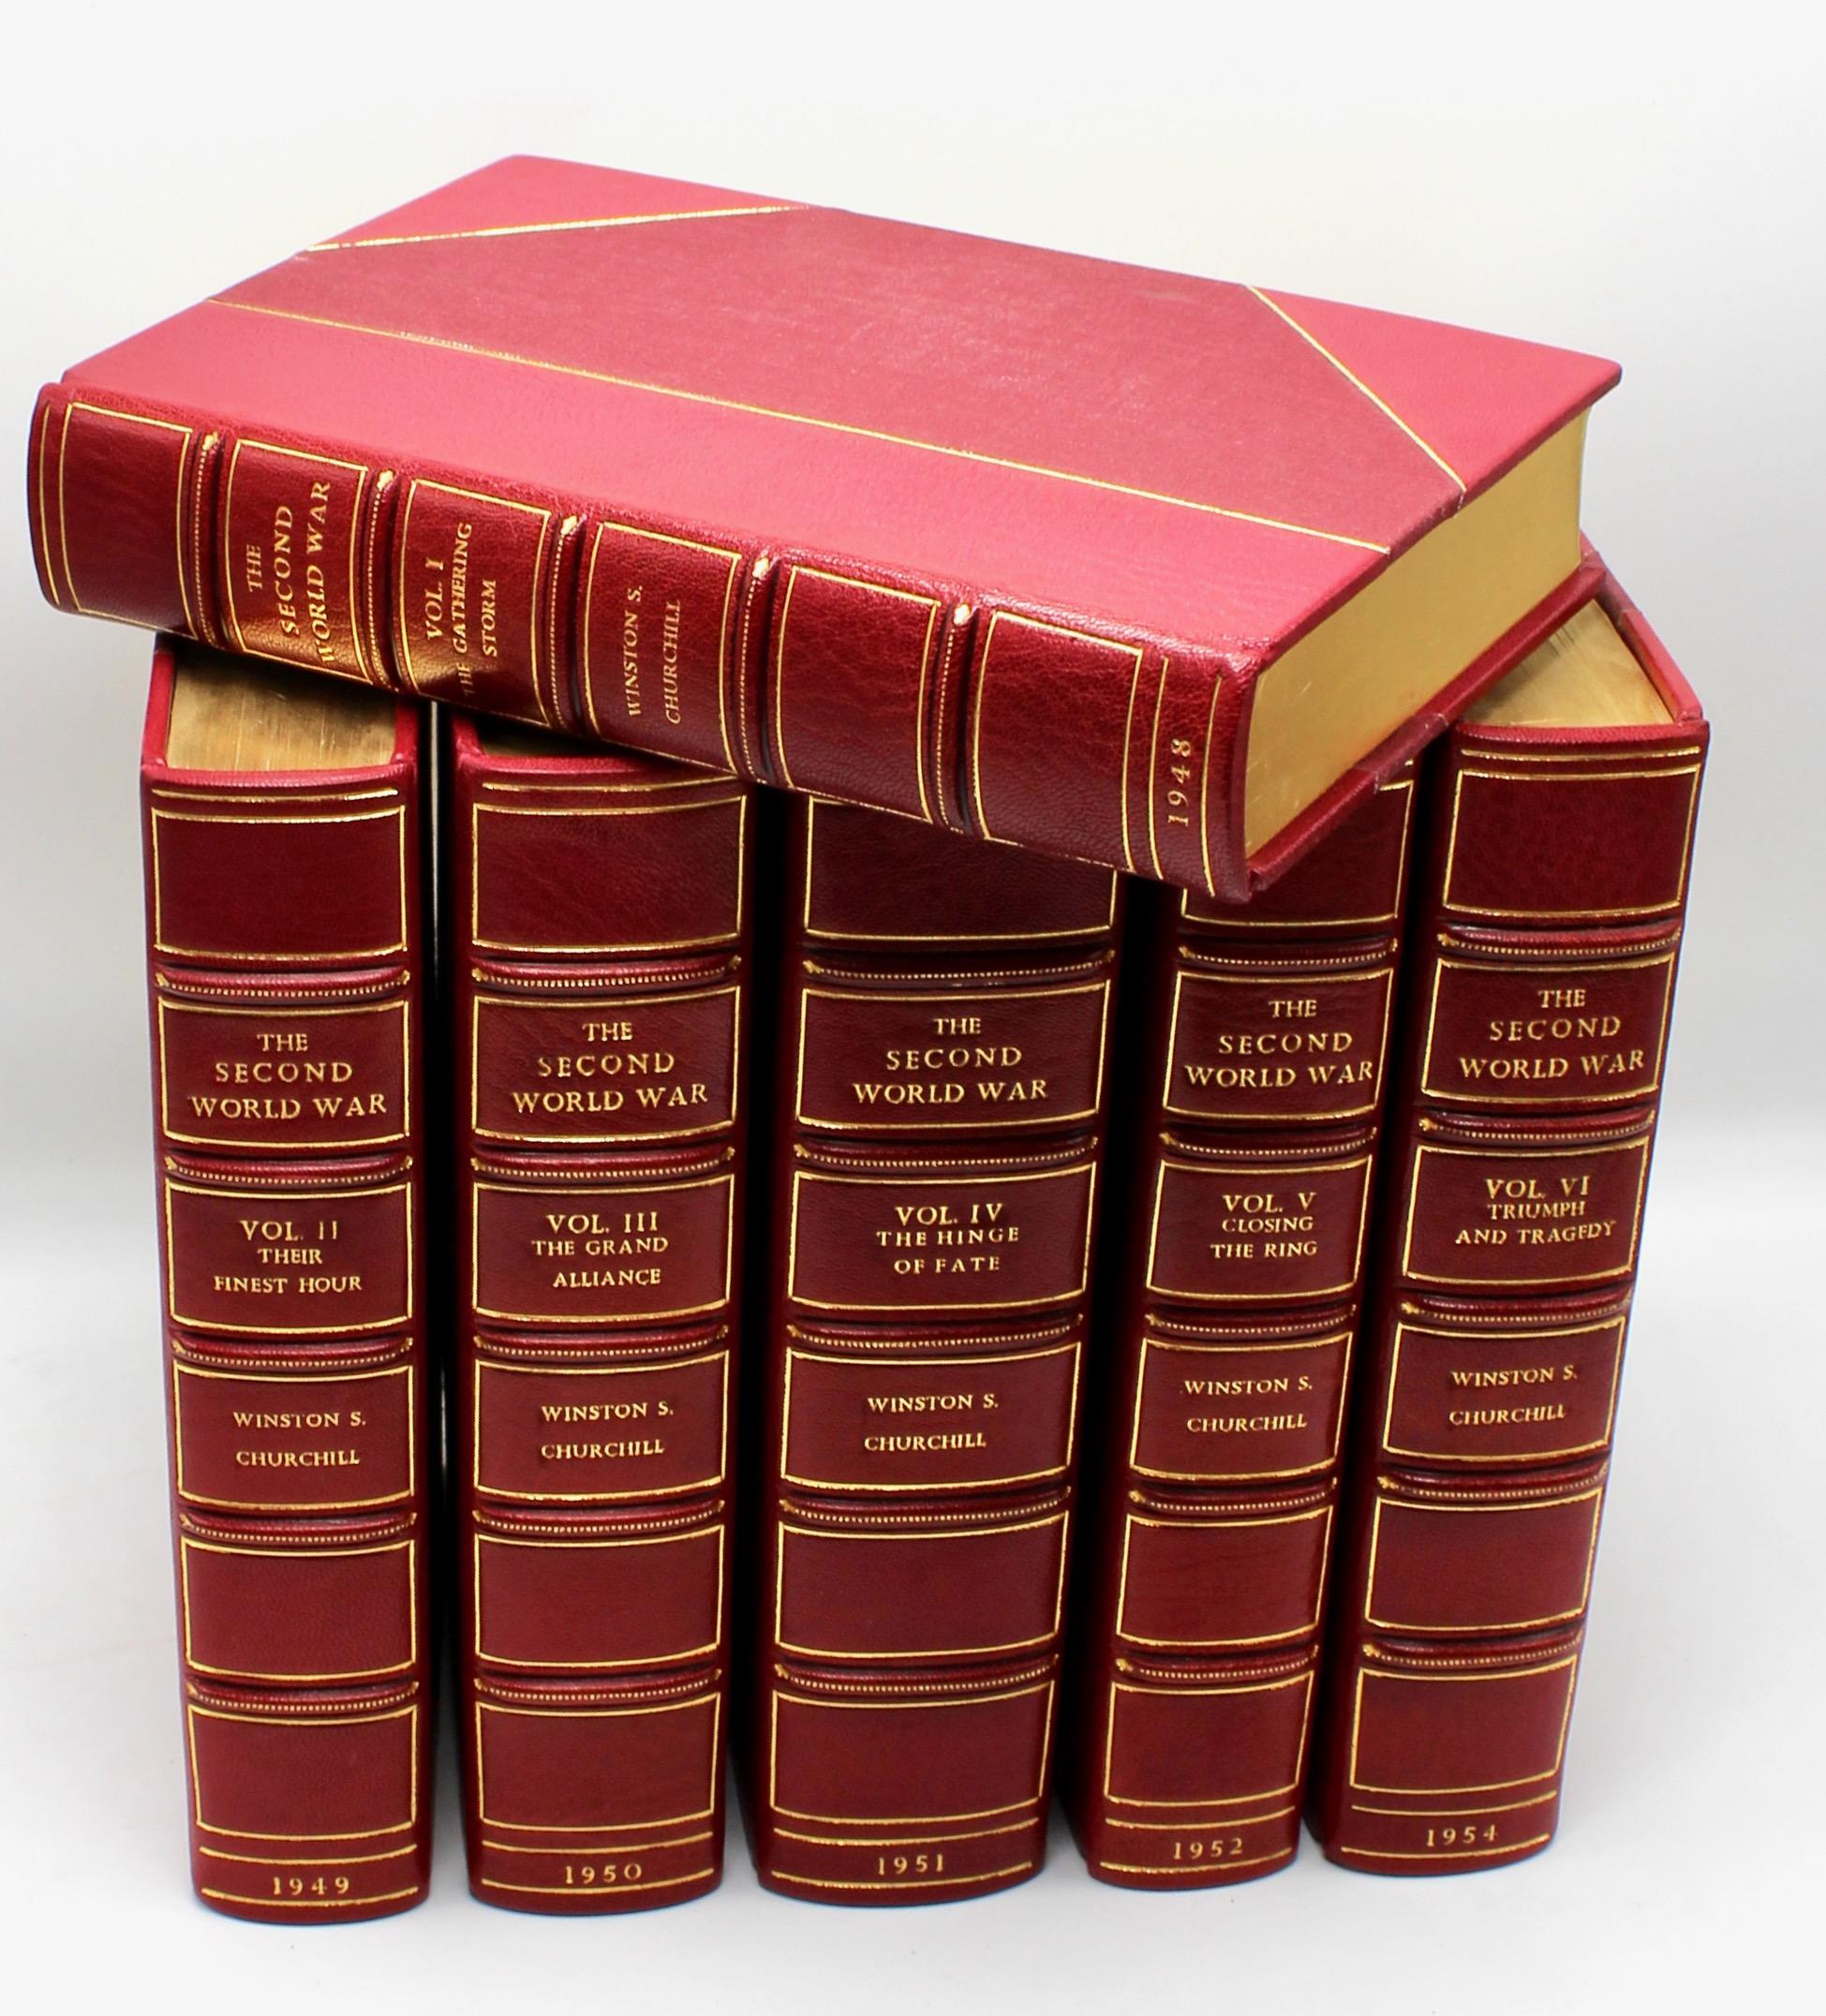 Churchill, Winston, The Second World War. London, 1948-1954: Cassell & Co. Ltd. First editions, 6 vols. Period Asprey bindings.

Presented is a first edition set of The Second World War. The first volume was published in 1948 and the final volume